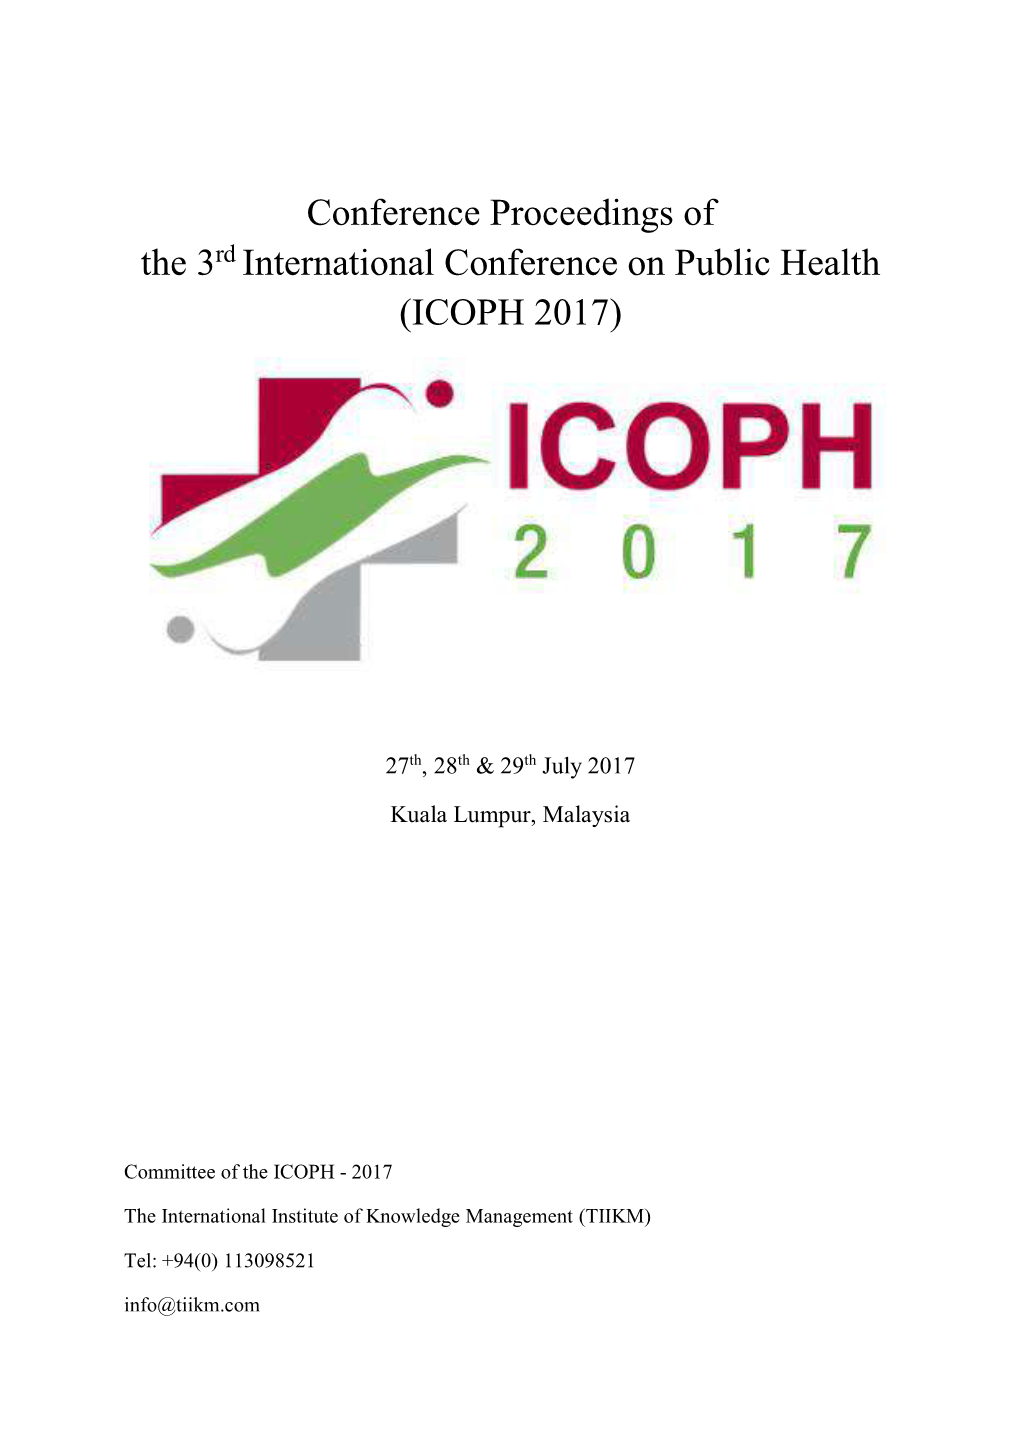 Conference Proceedings of the 3Rd International Conference on Public Health (ICOPH 2017)